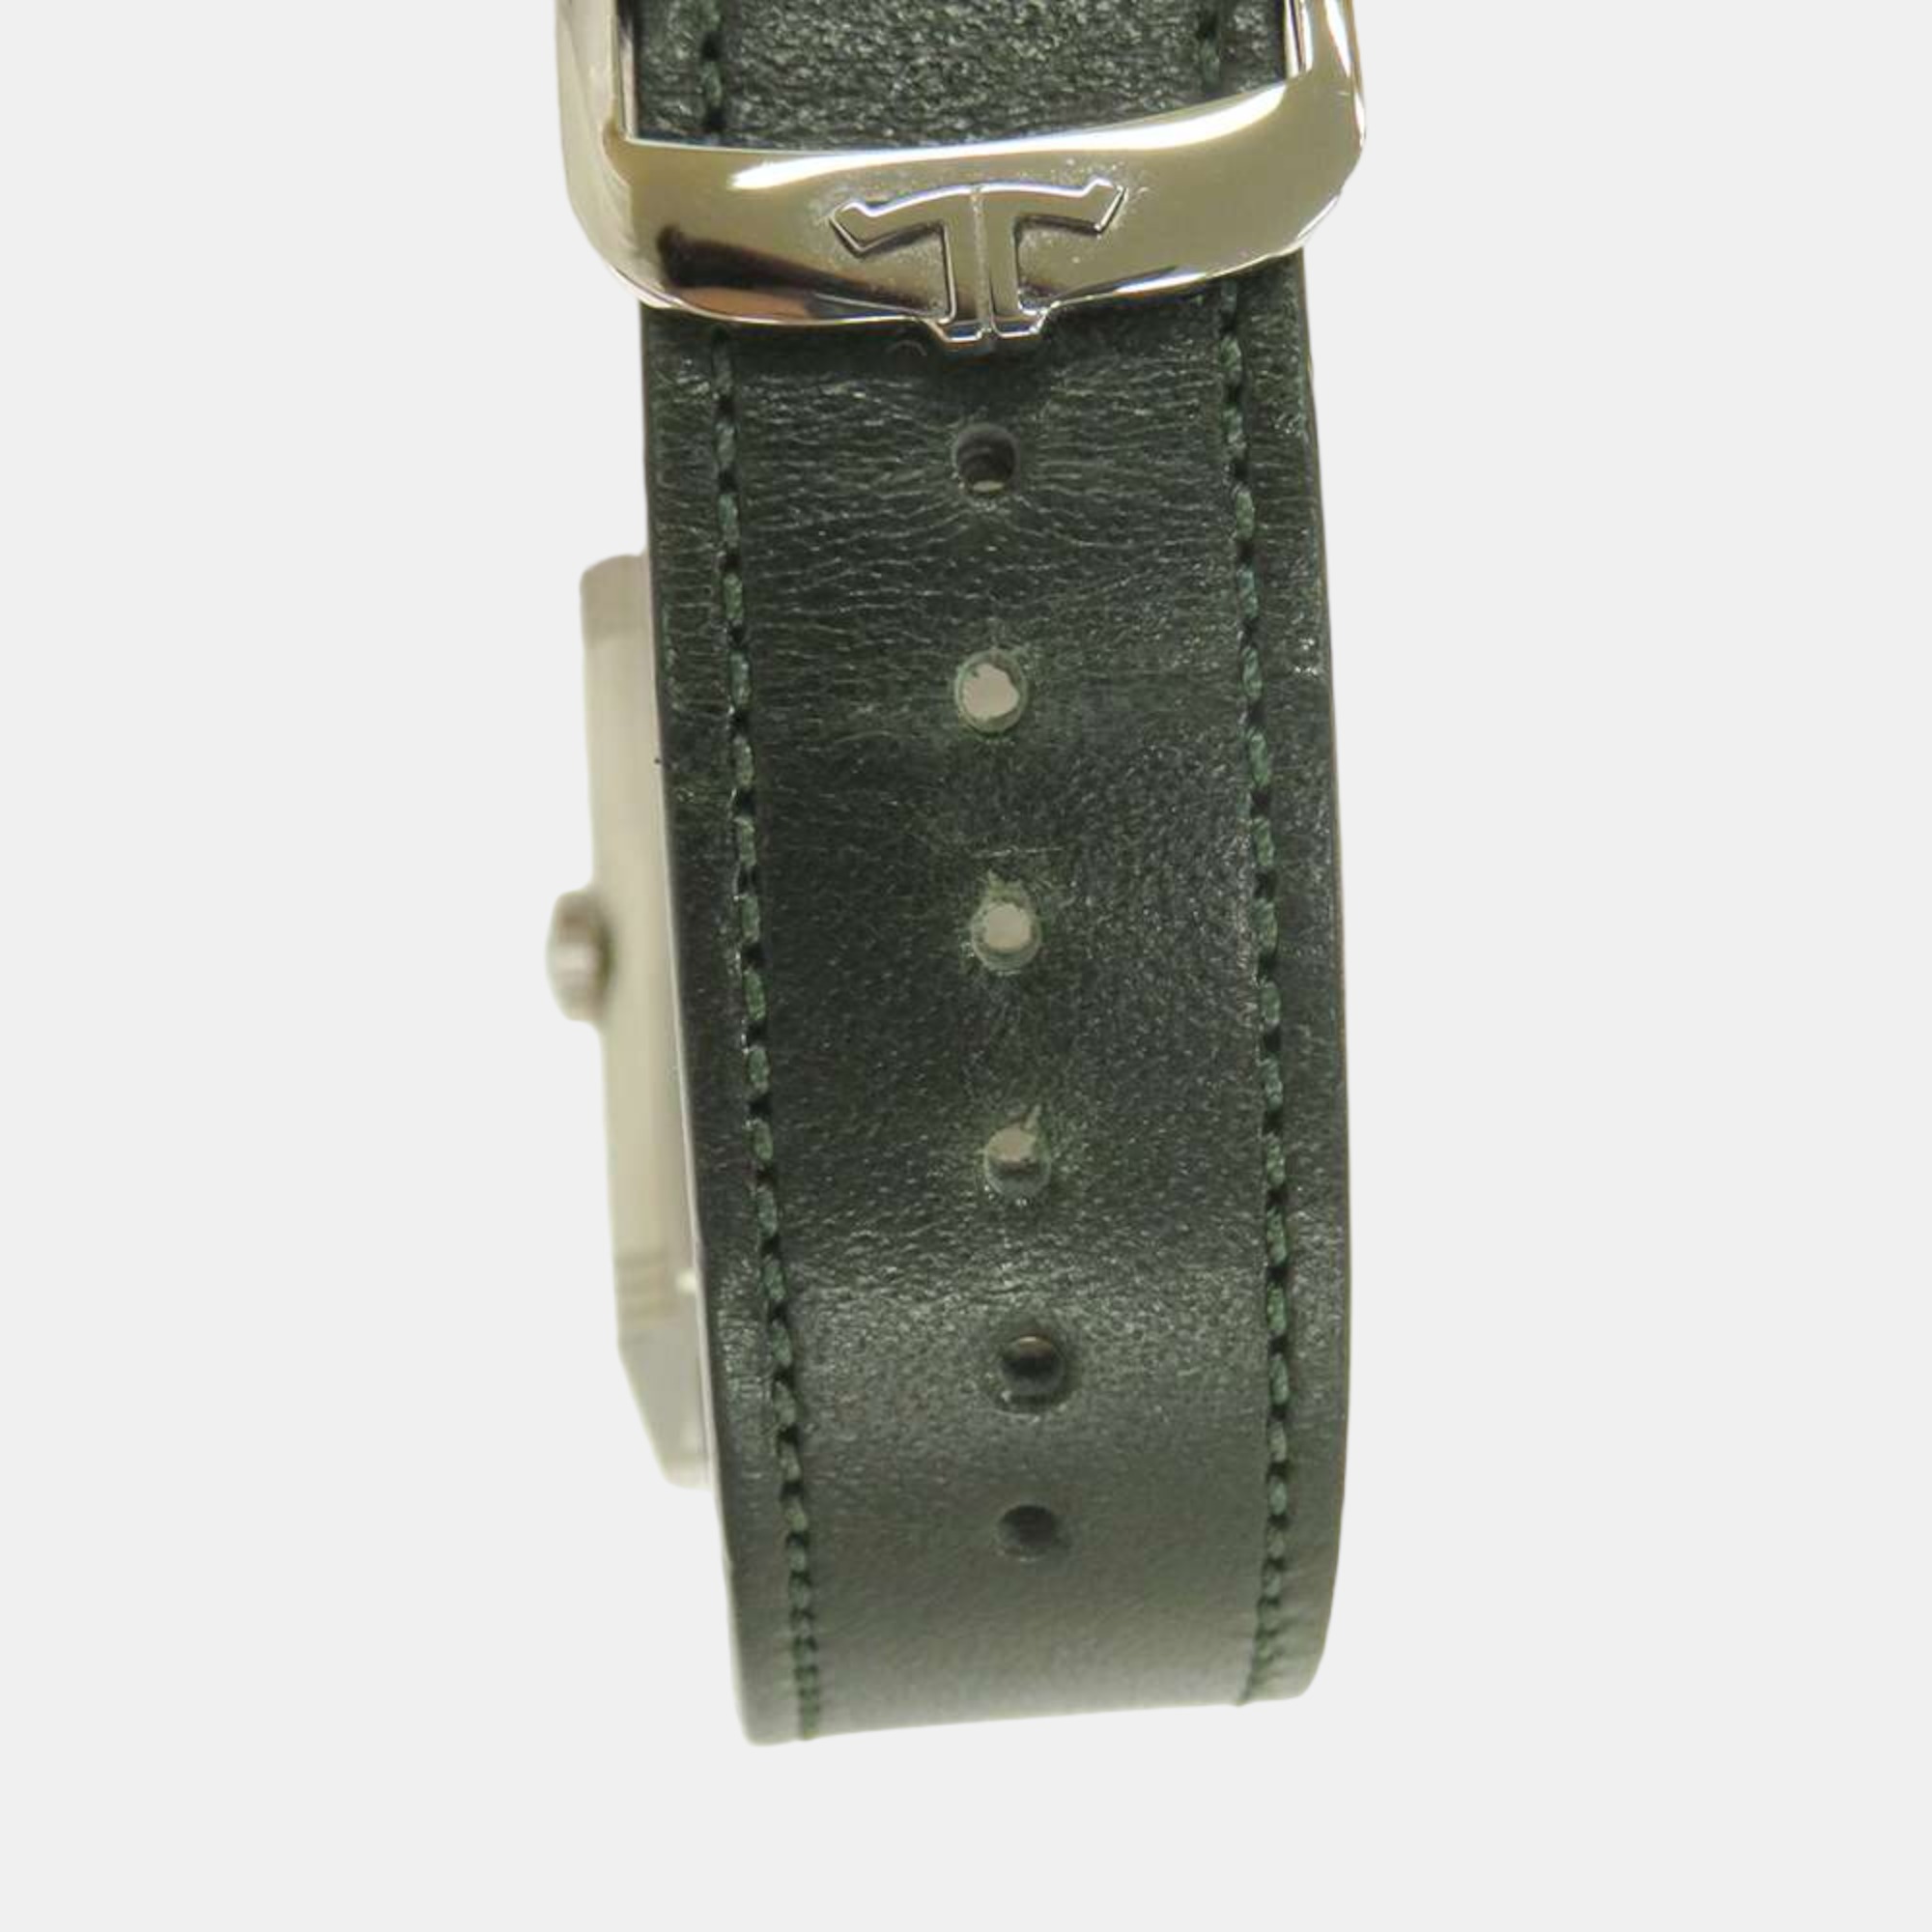 Jaeger LeCoultre Green Stainless Steel Reverso Q397843 Men's Wristwatch 45 Mm